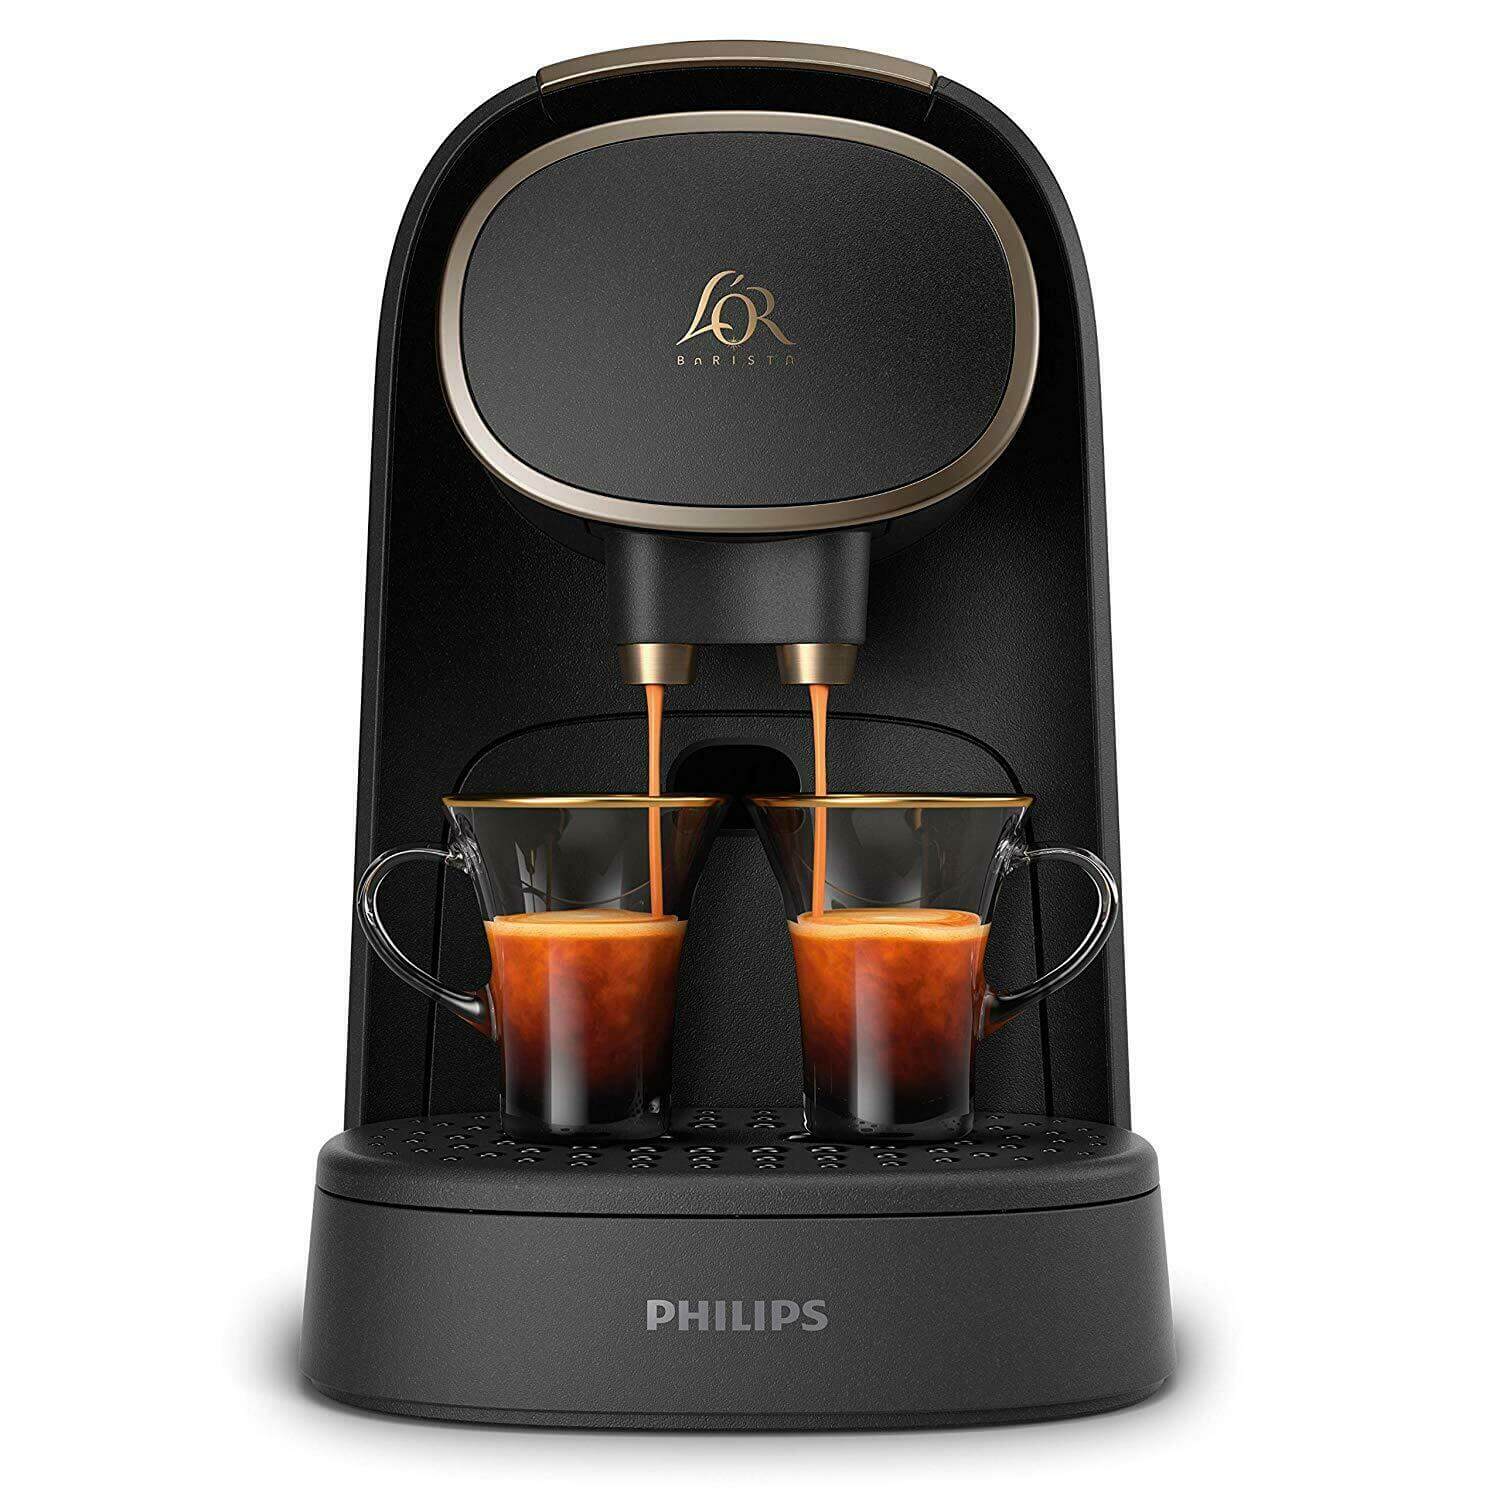 Philips L’OR Barista LM8016 / 90